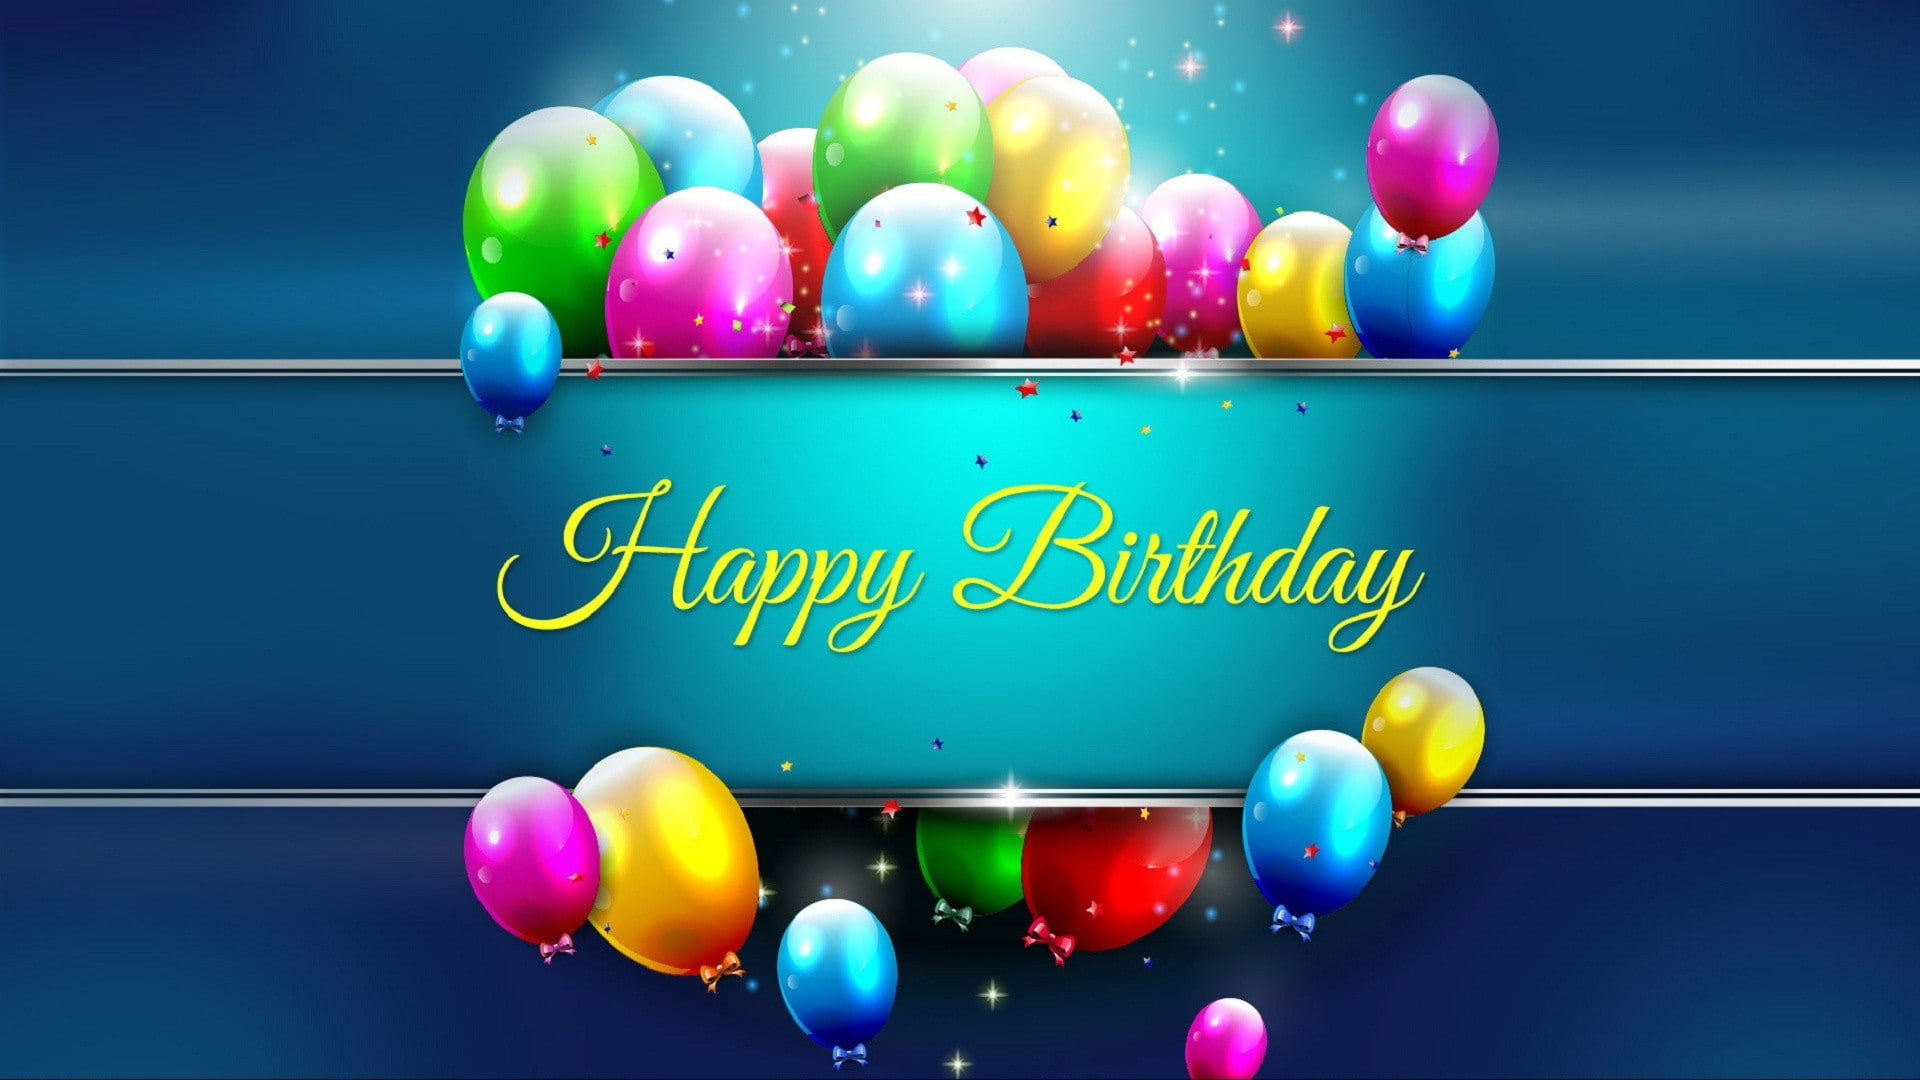 6 Happy Birthday Zoom Backgrounds for Online Virtual Party - FineShare